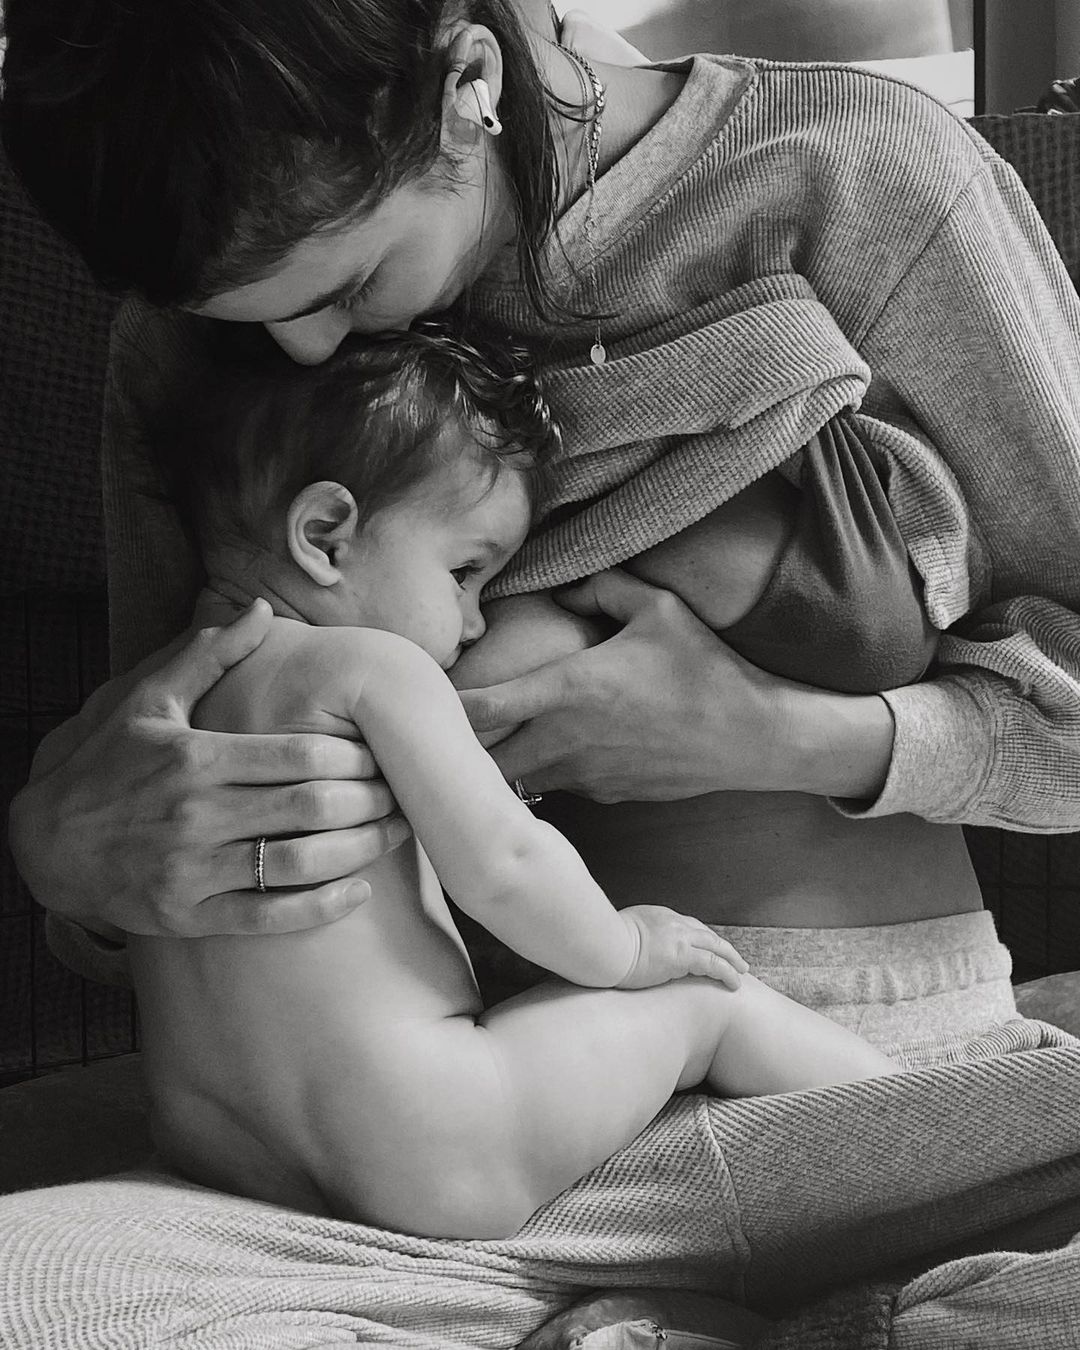 When To Stop Breastfeeding: What Happens To Your Body When You Stop  Breastfeeding - Parade